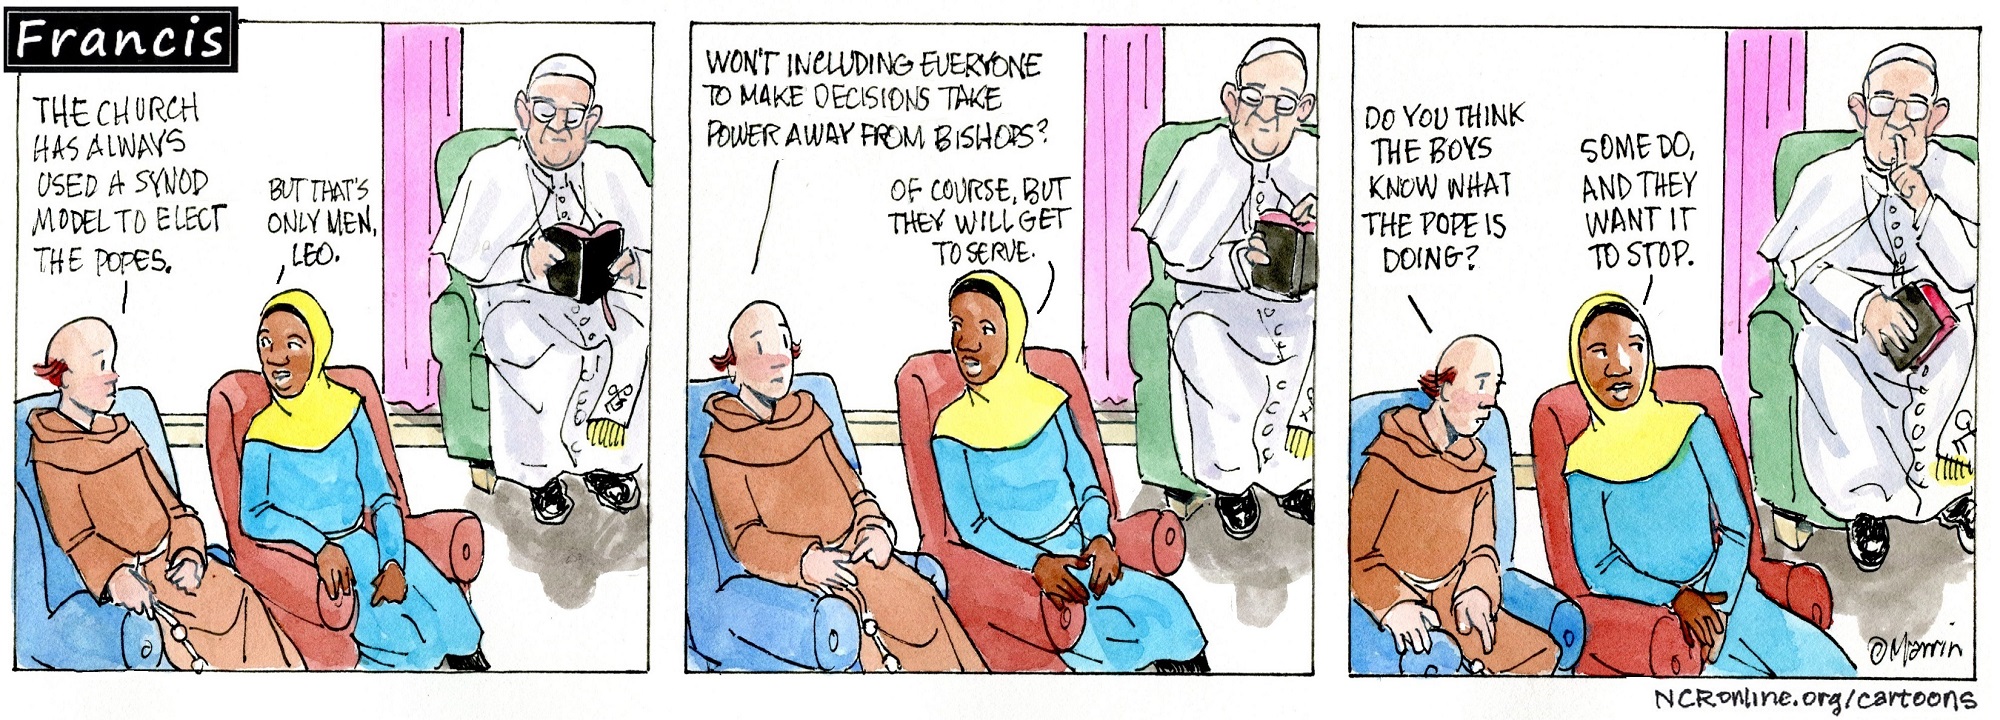 Francis, the comic strip: Brother Leo and Gabby wonder what would happen if everyone in the church had the power to make decisions.